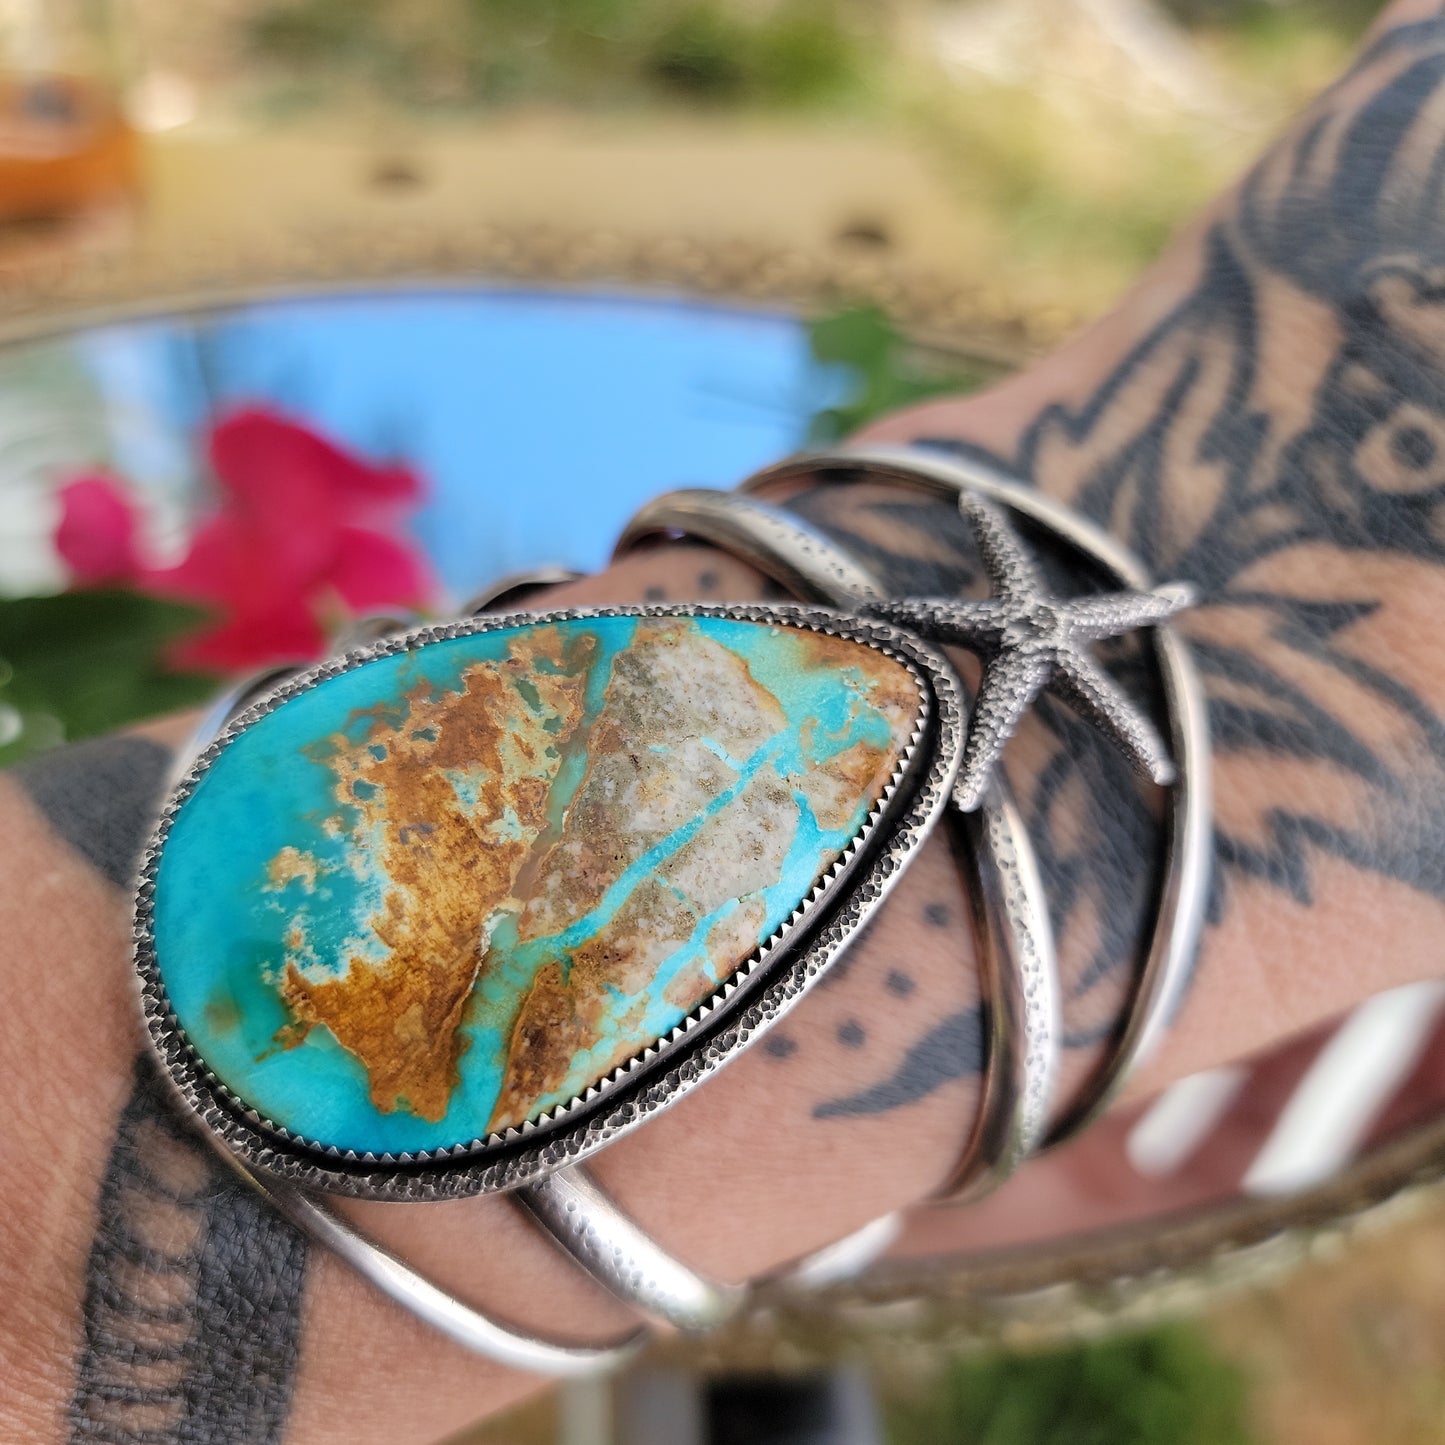 XX//AEGEAN Cuff Bracelet - Stone Mountain Turquoise in All Sterling Silver size M